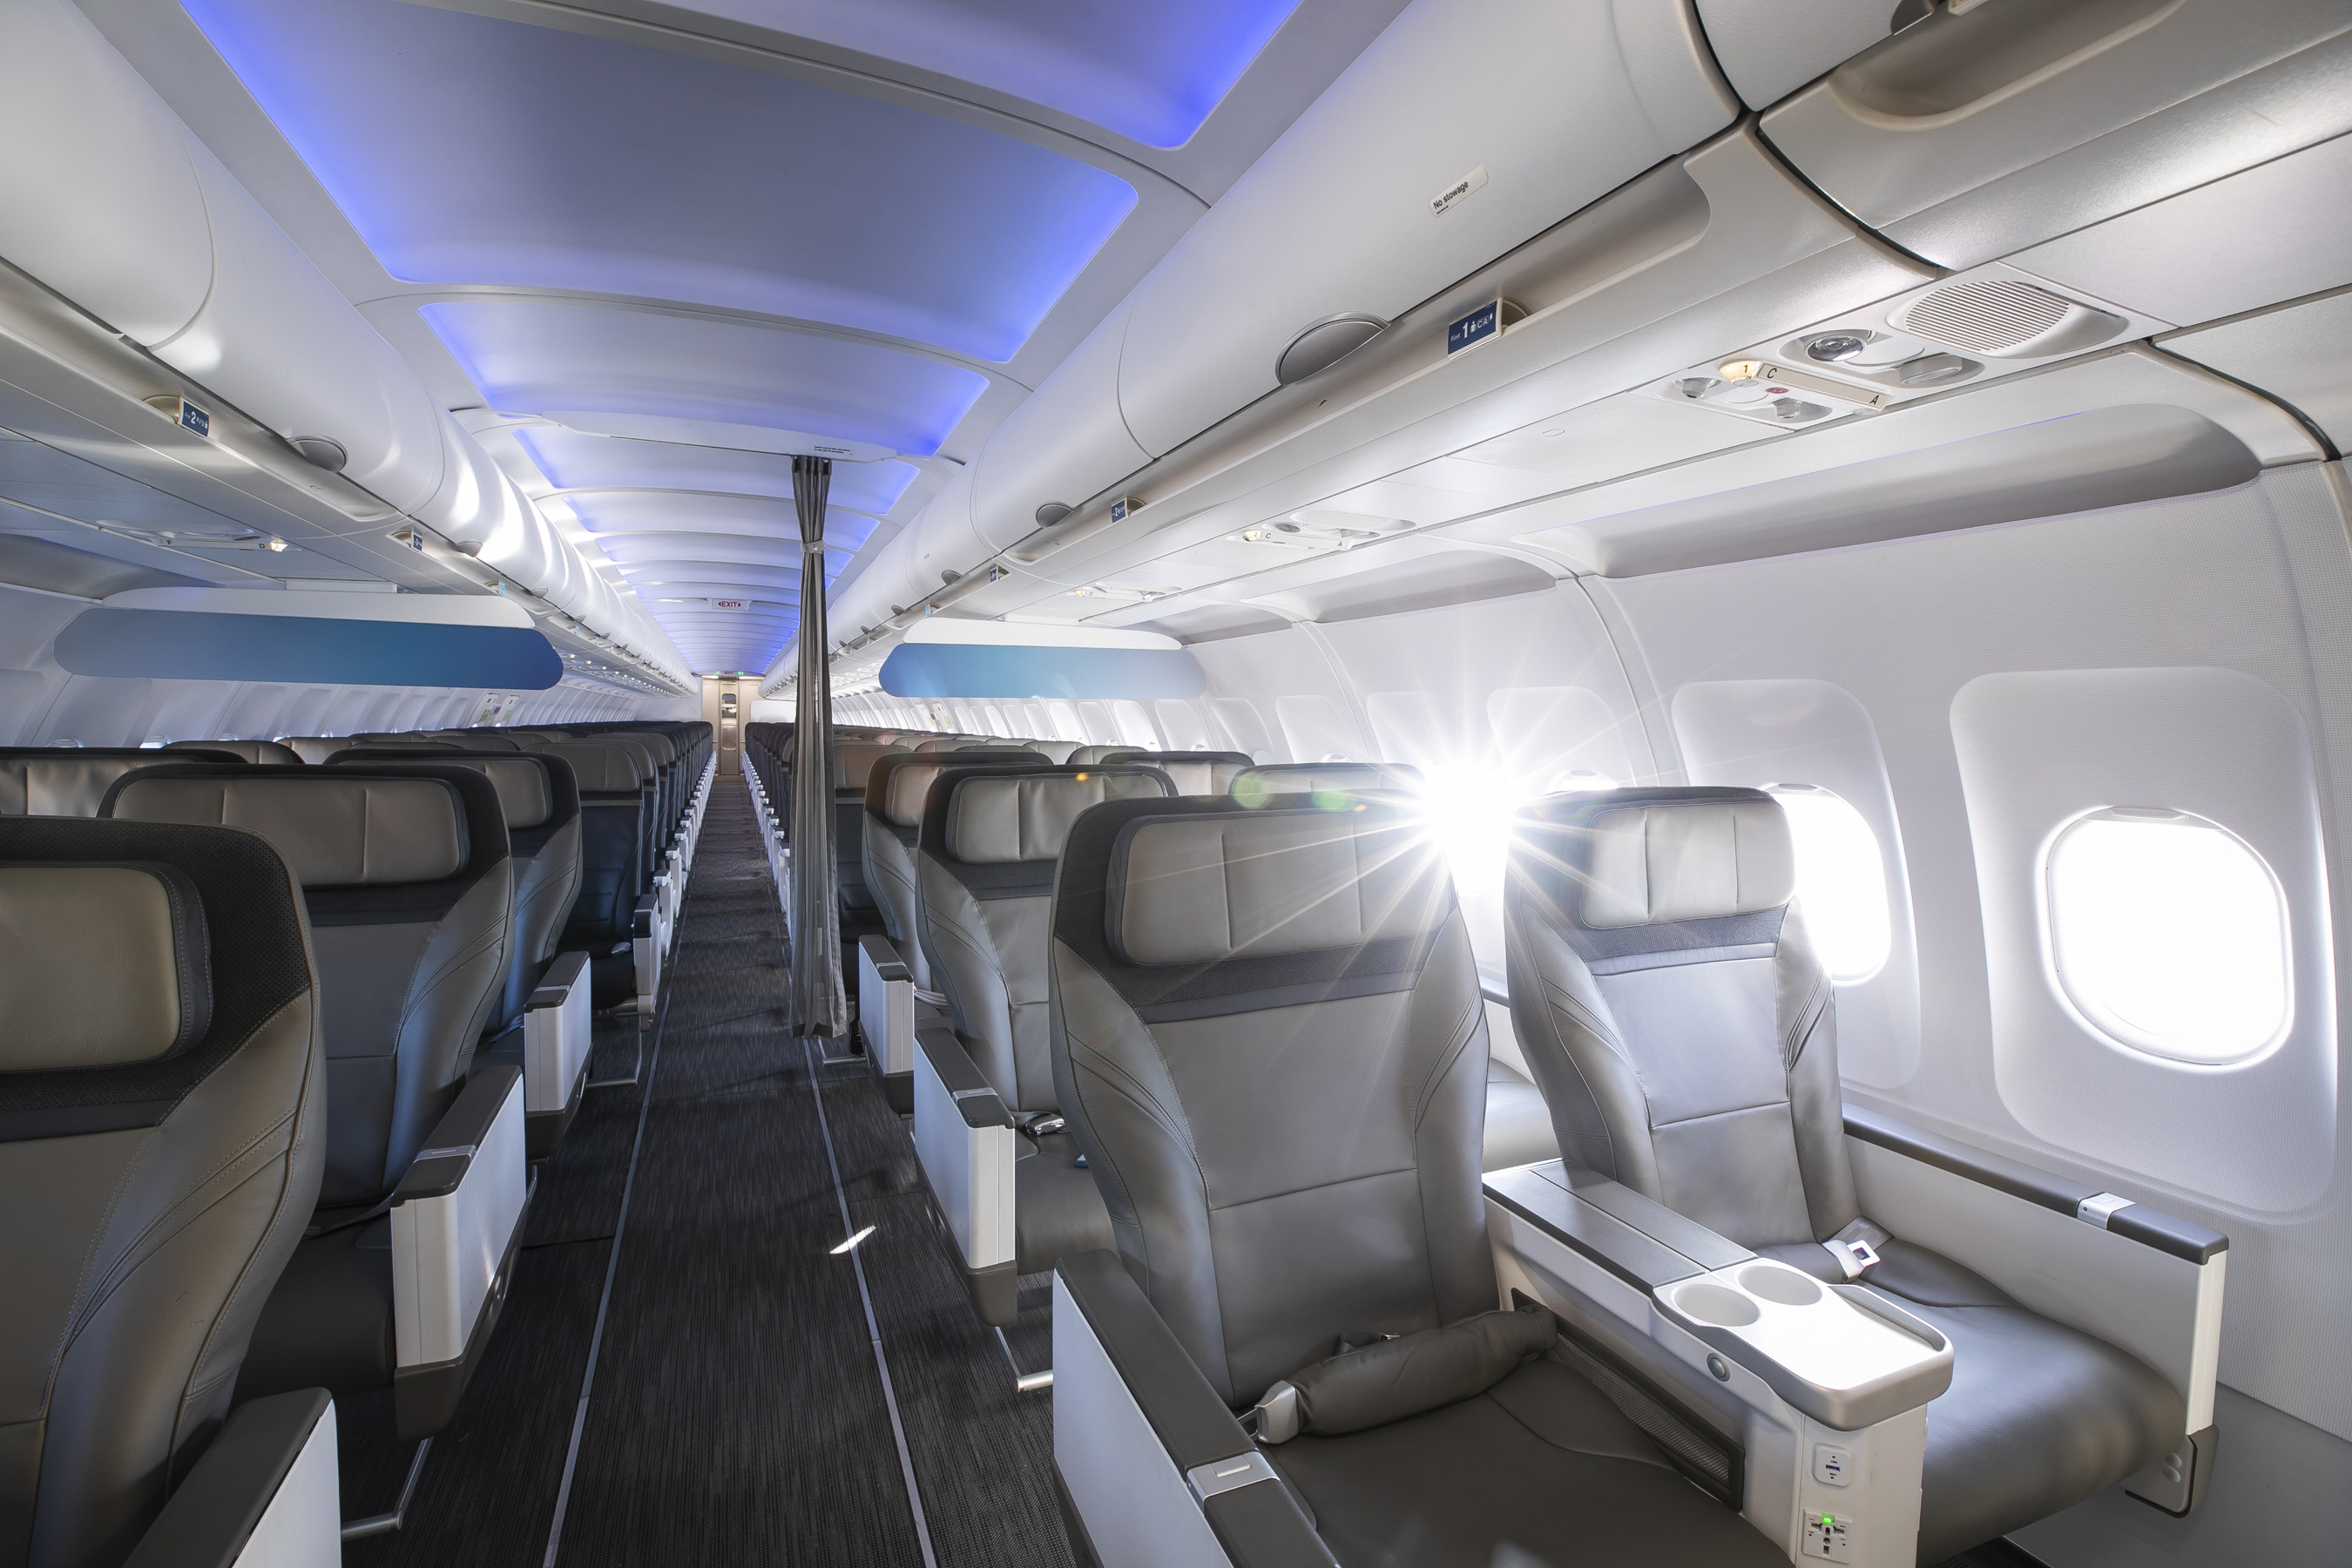 Now arriving: Alaska Airlines' new cabin experience